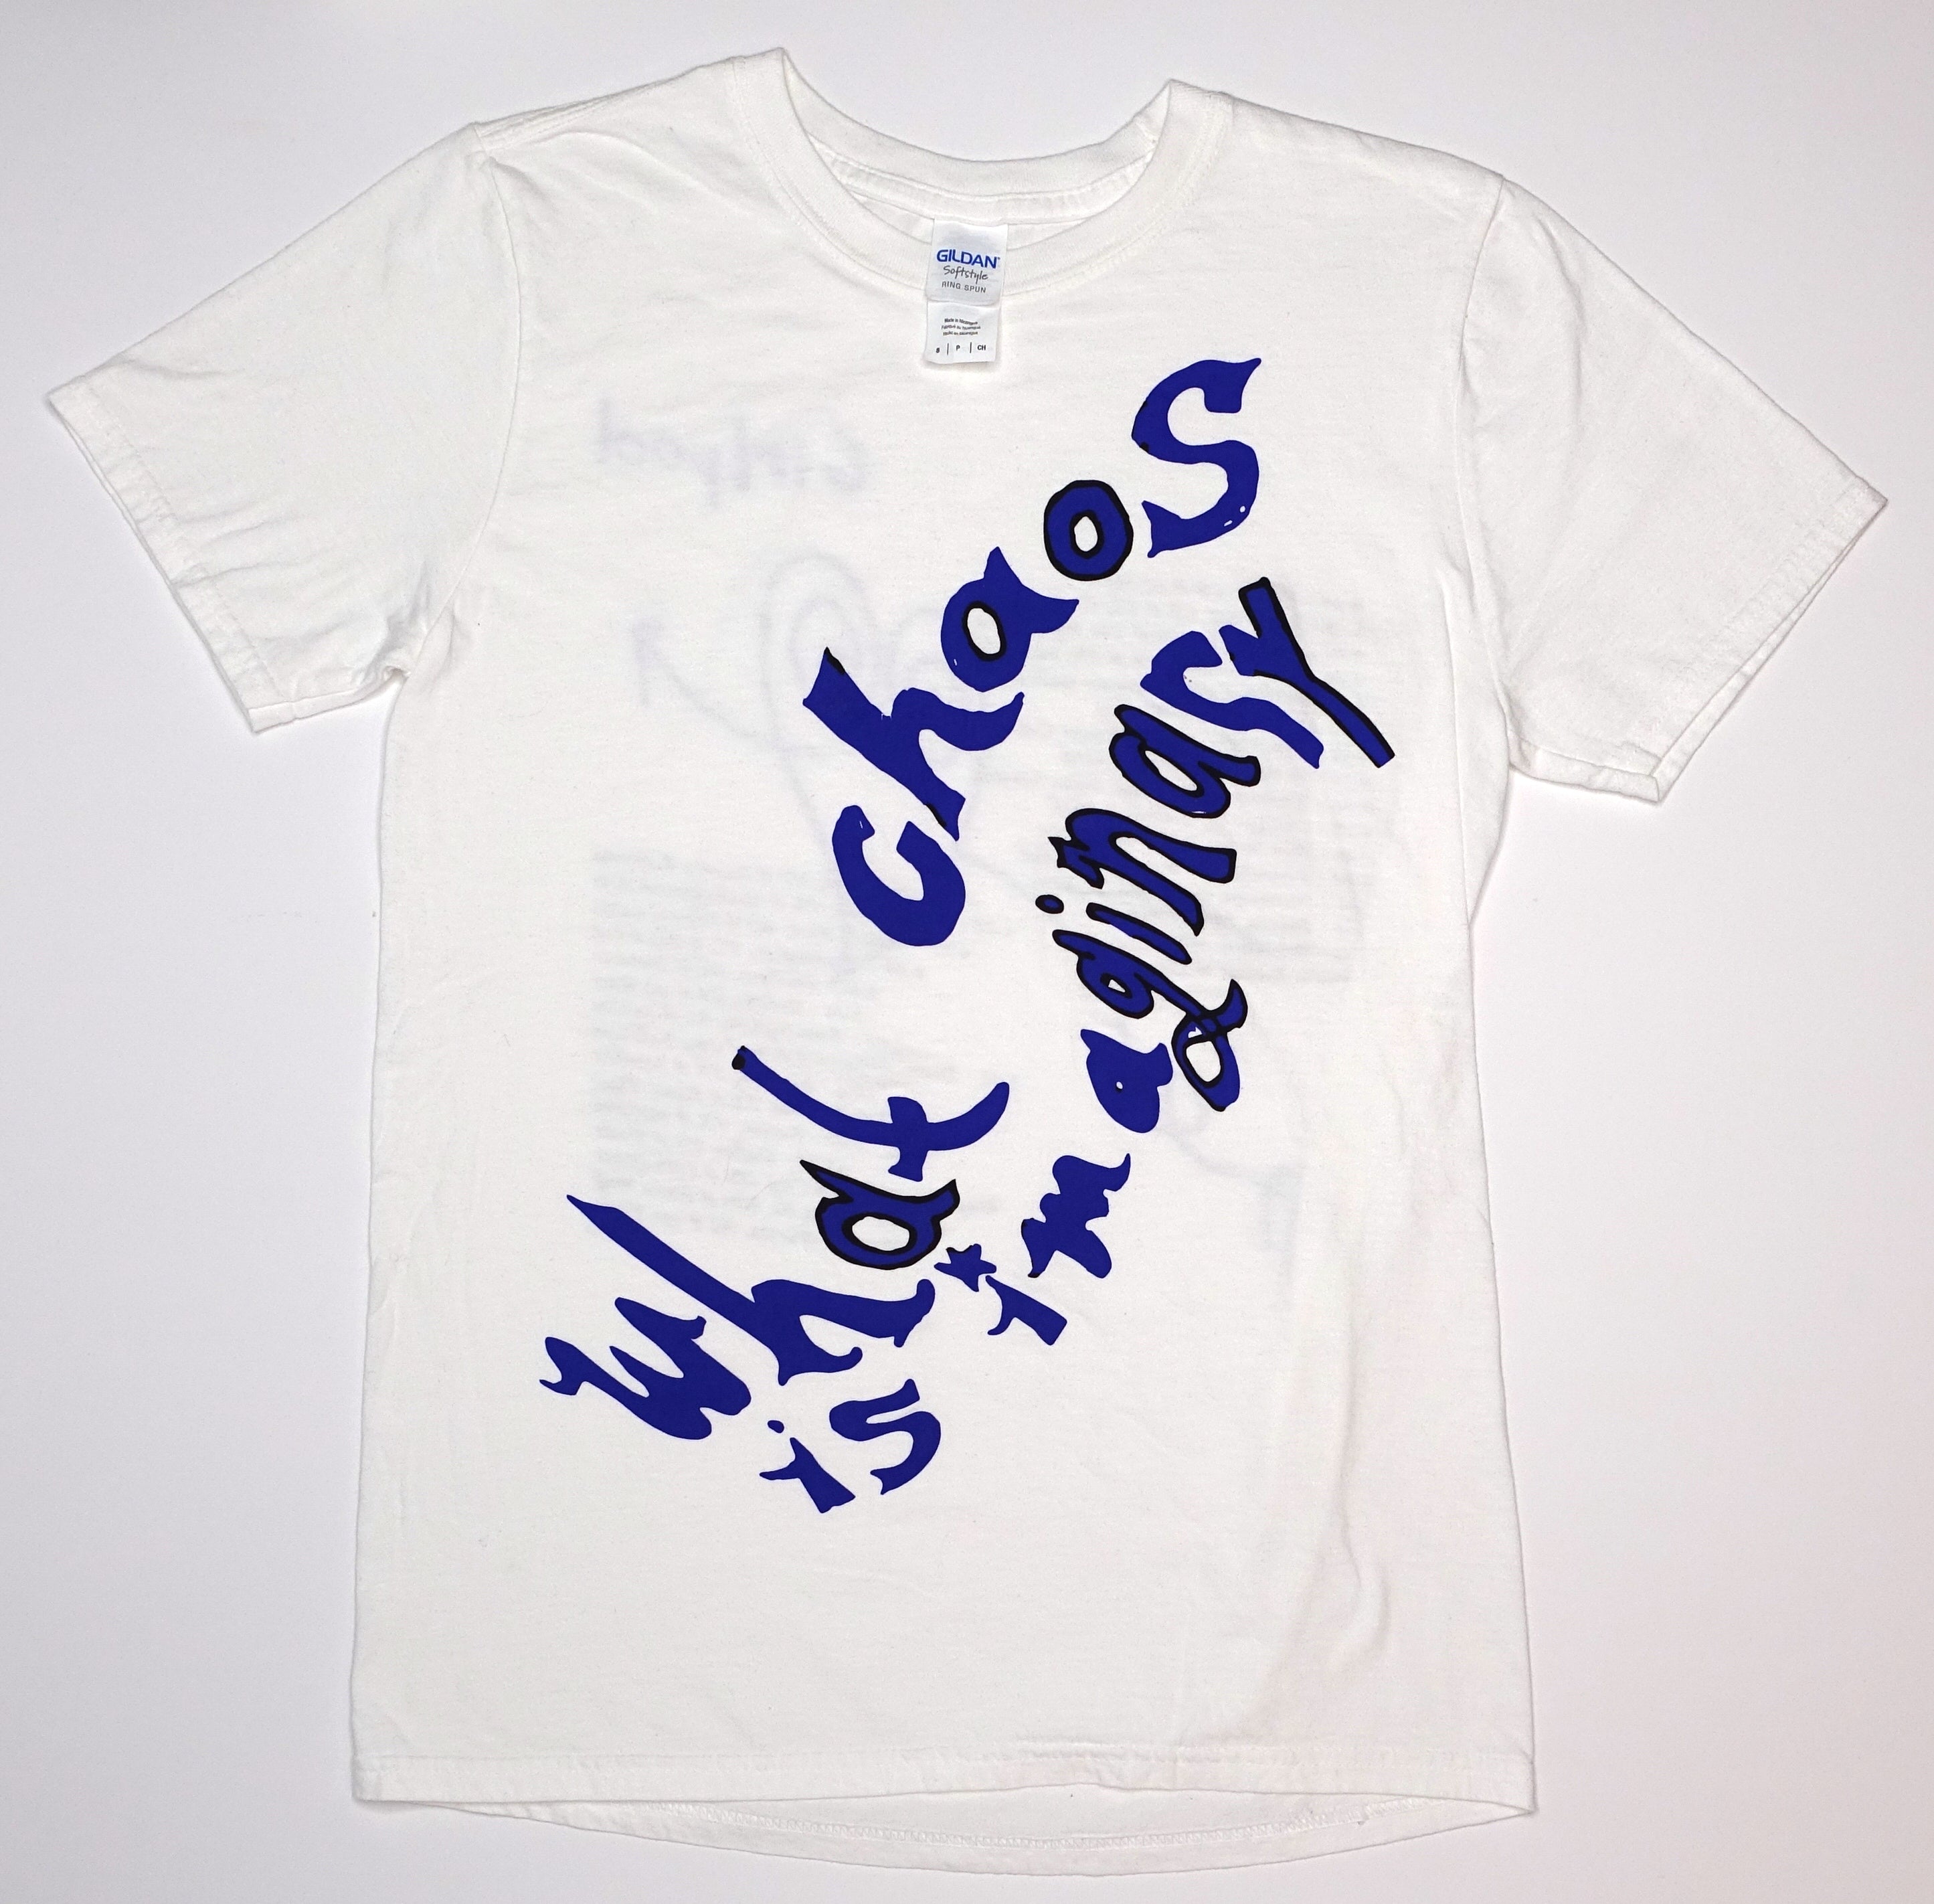 Girlpool – What Chaos Is Imaginary? 2019 Tour Shirt Size Small